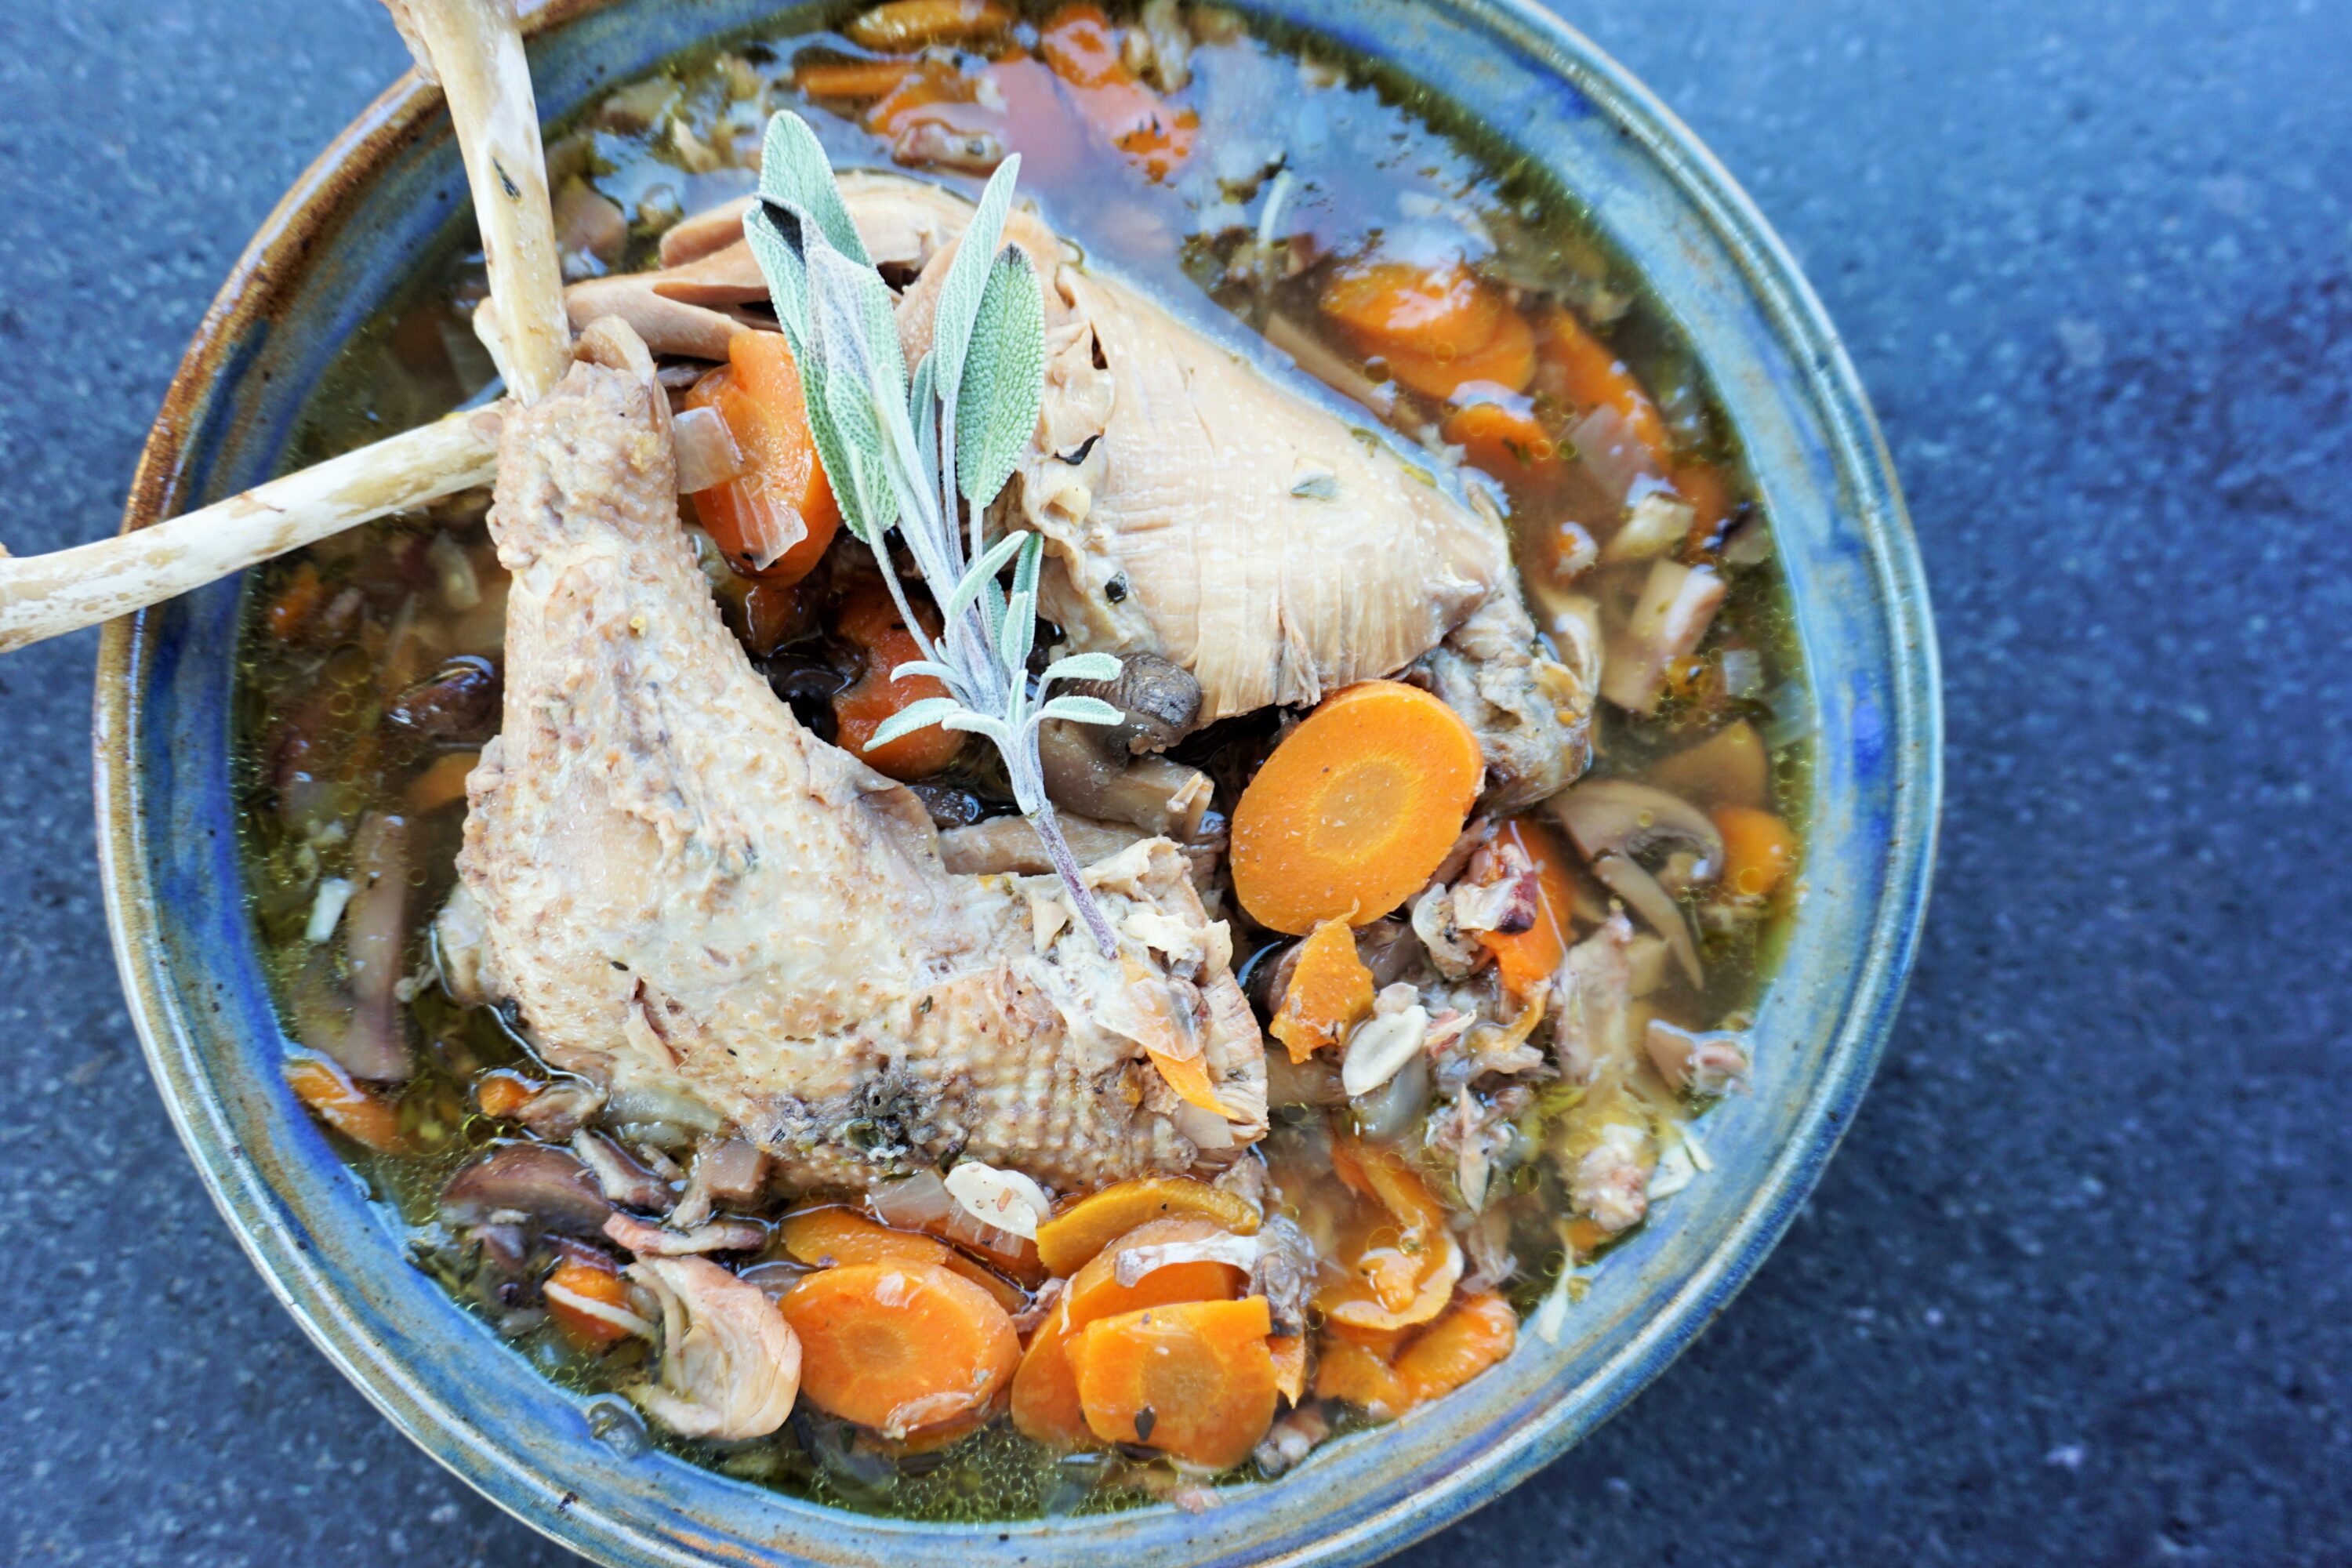 Whole Chicken (Yes, feet too!) Coq Au Vin